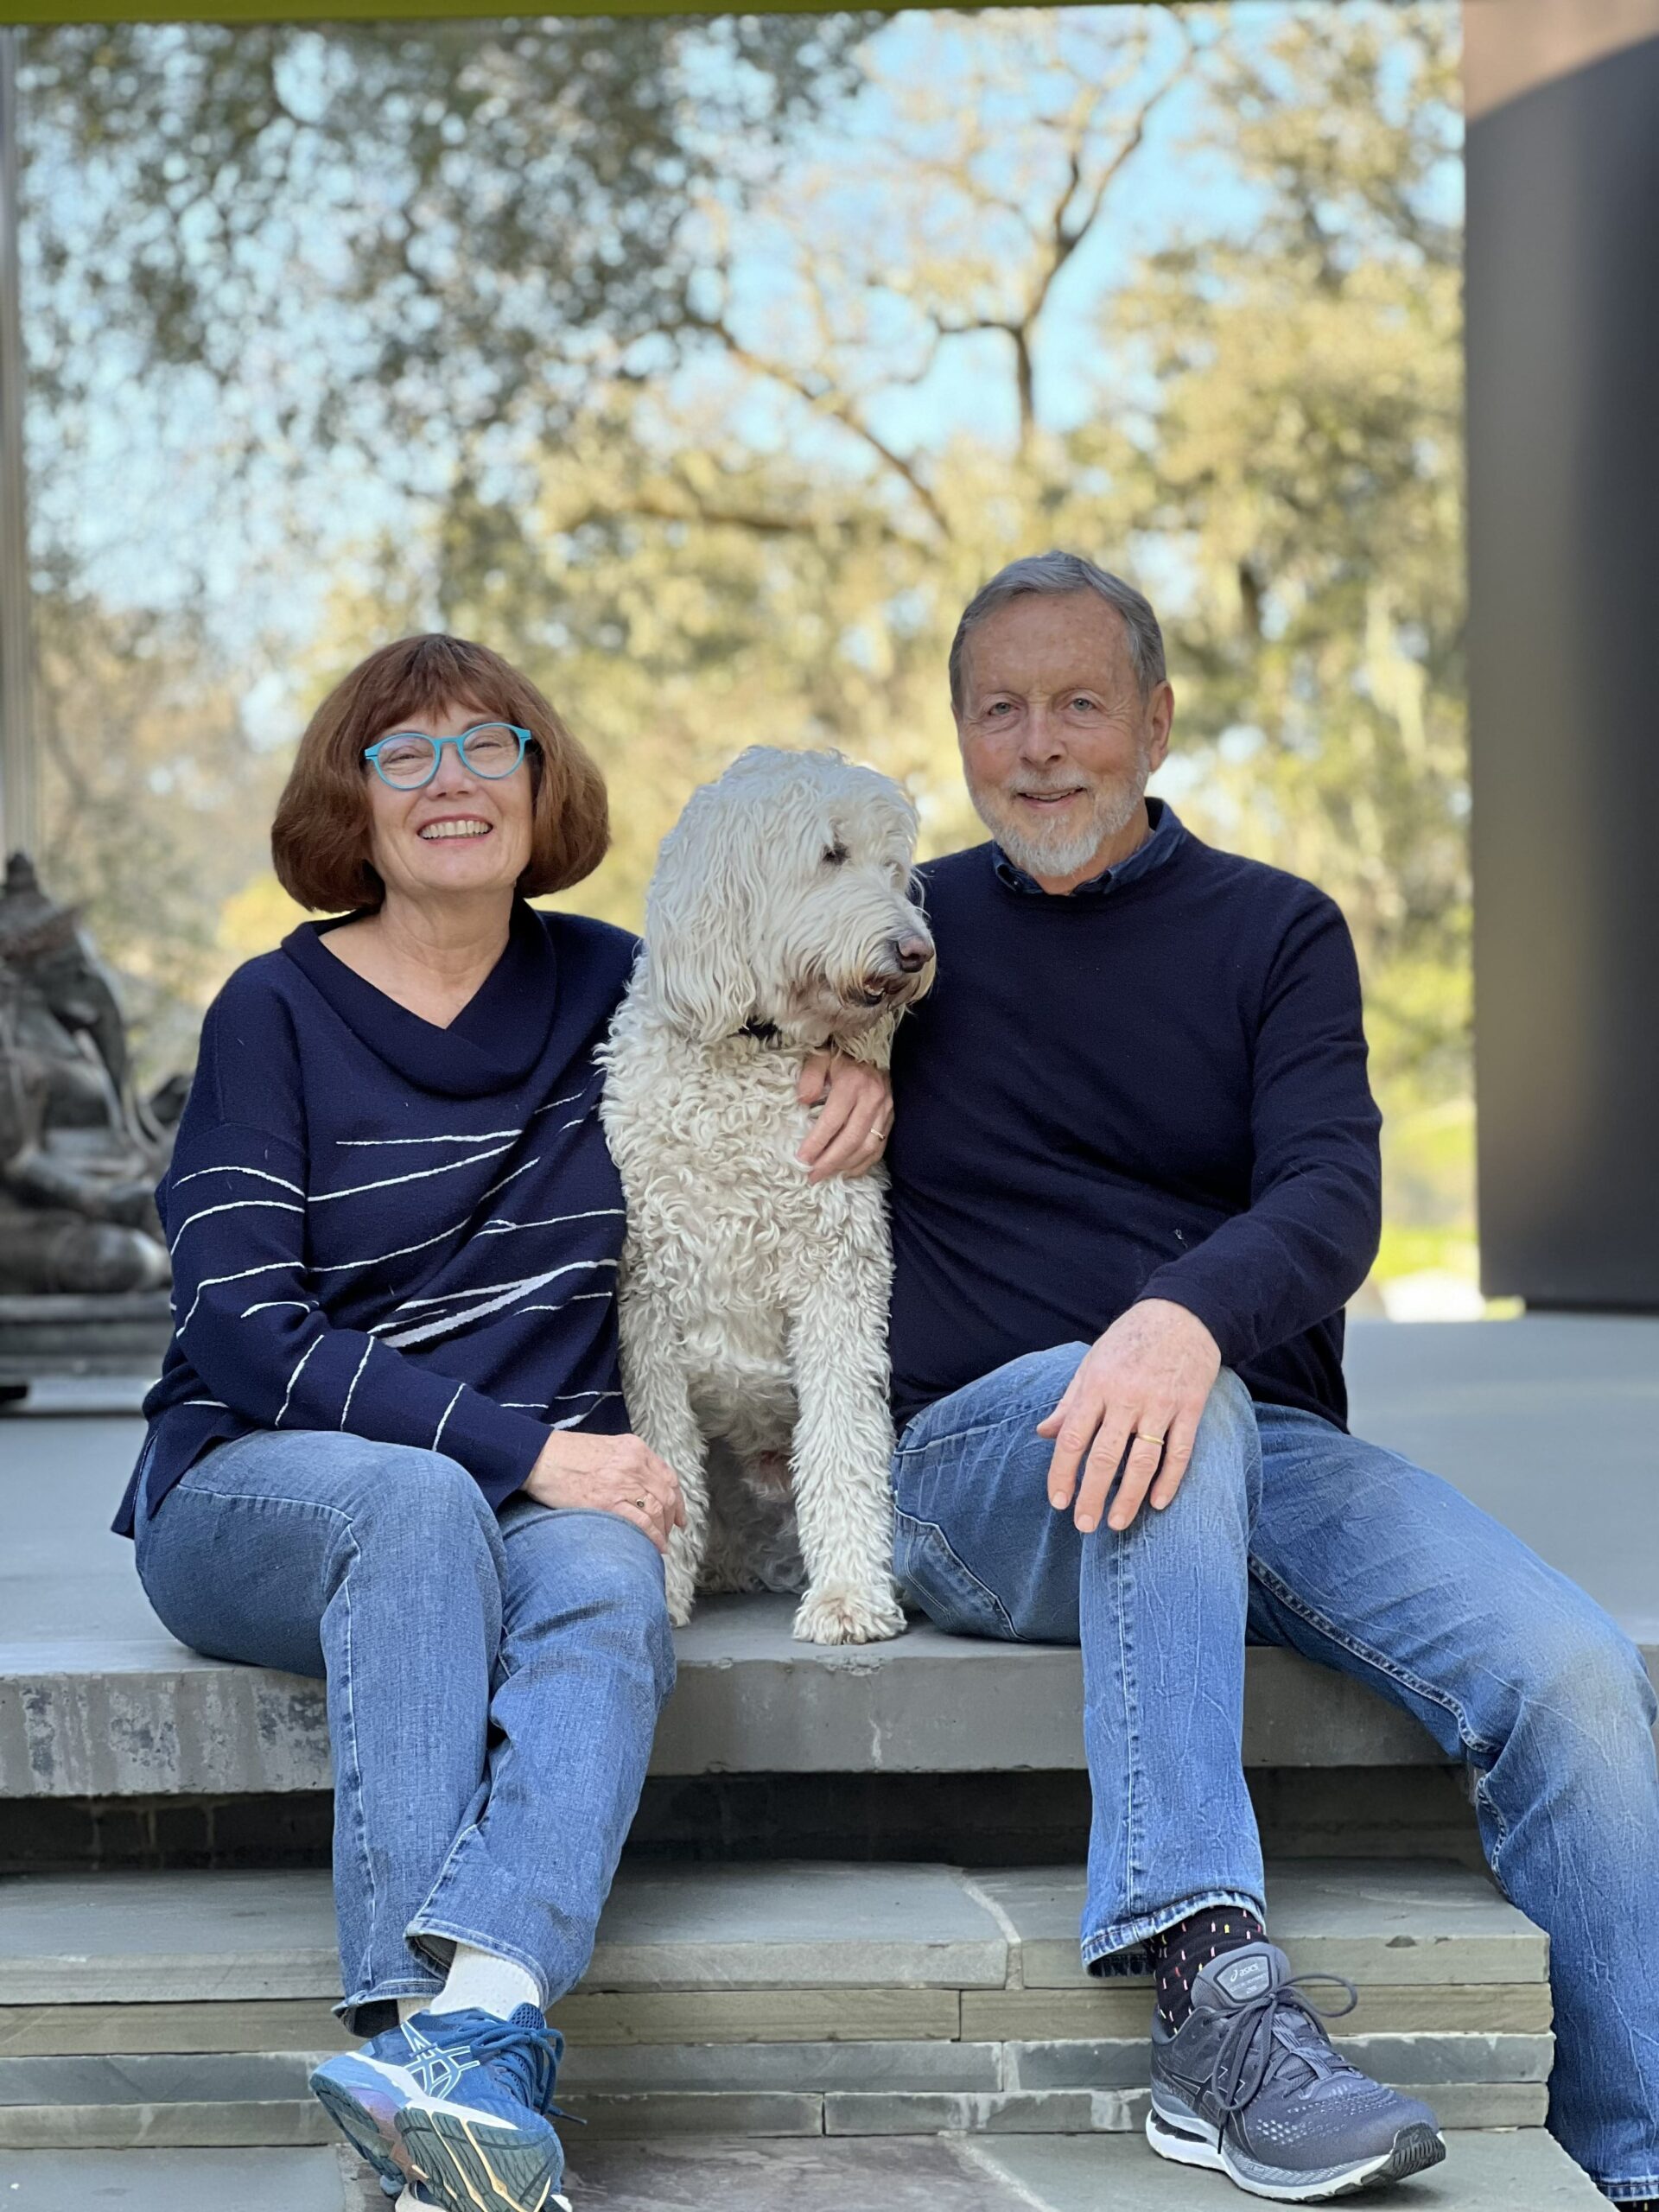 Architects Jan O’Brien and Craig Hartman with their dog Gryffin. (Kim Brown Photography)